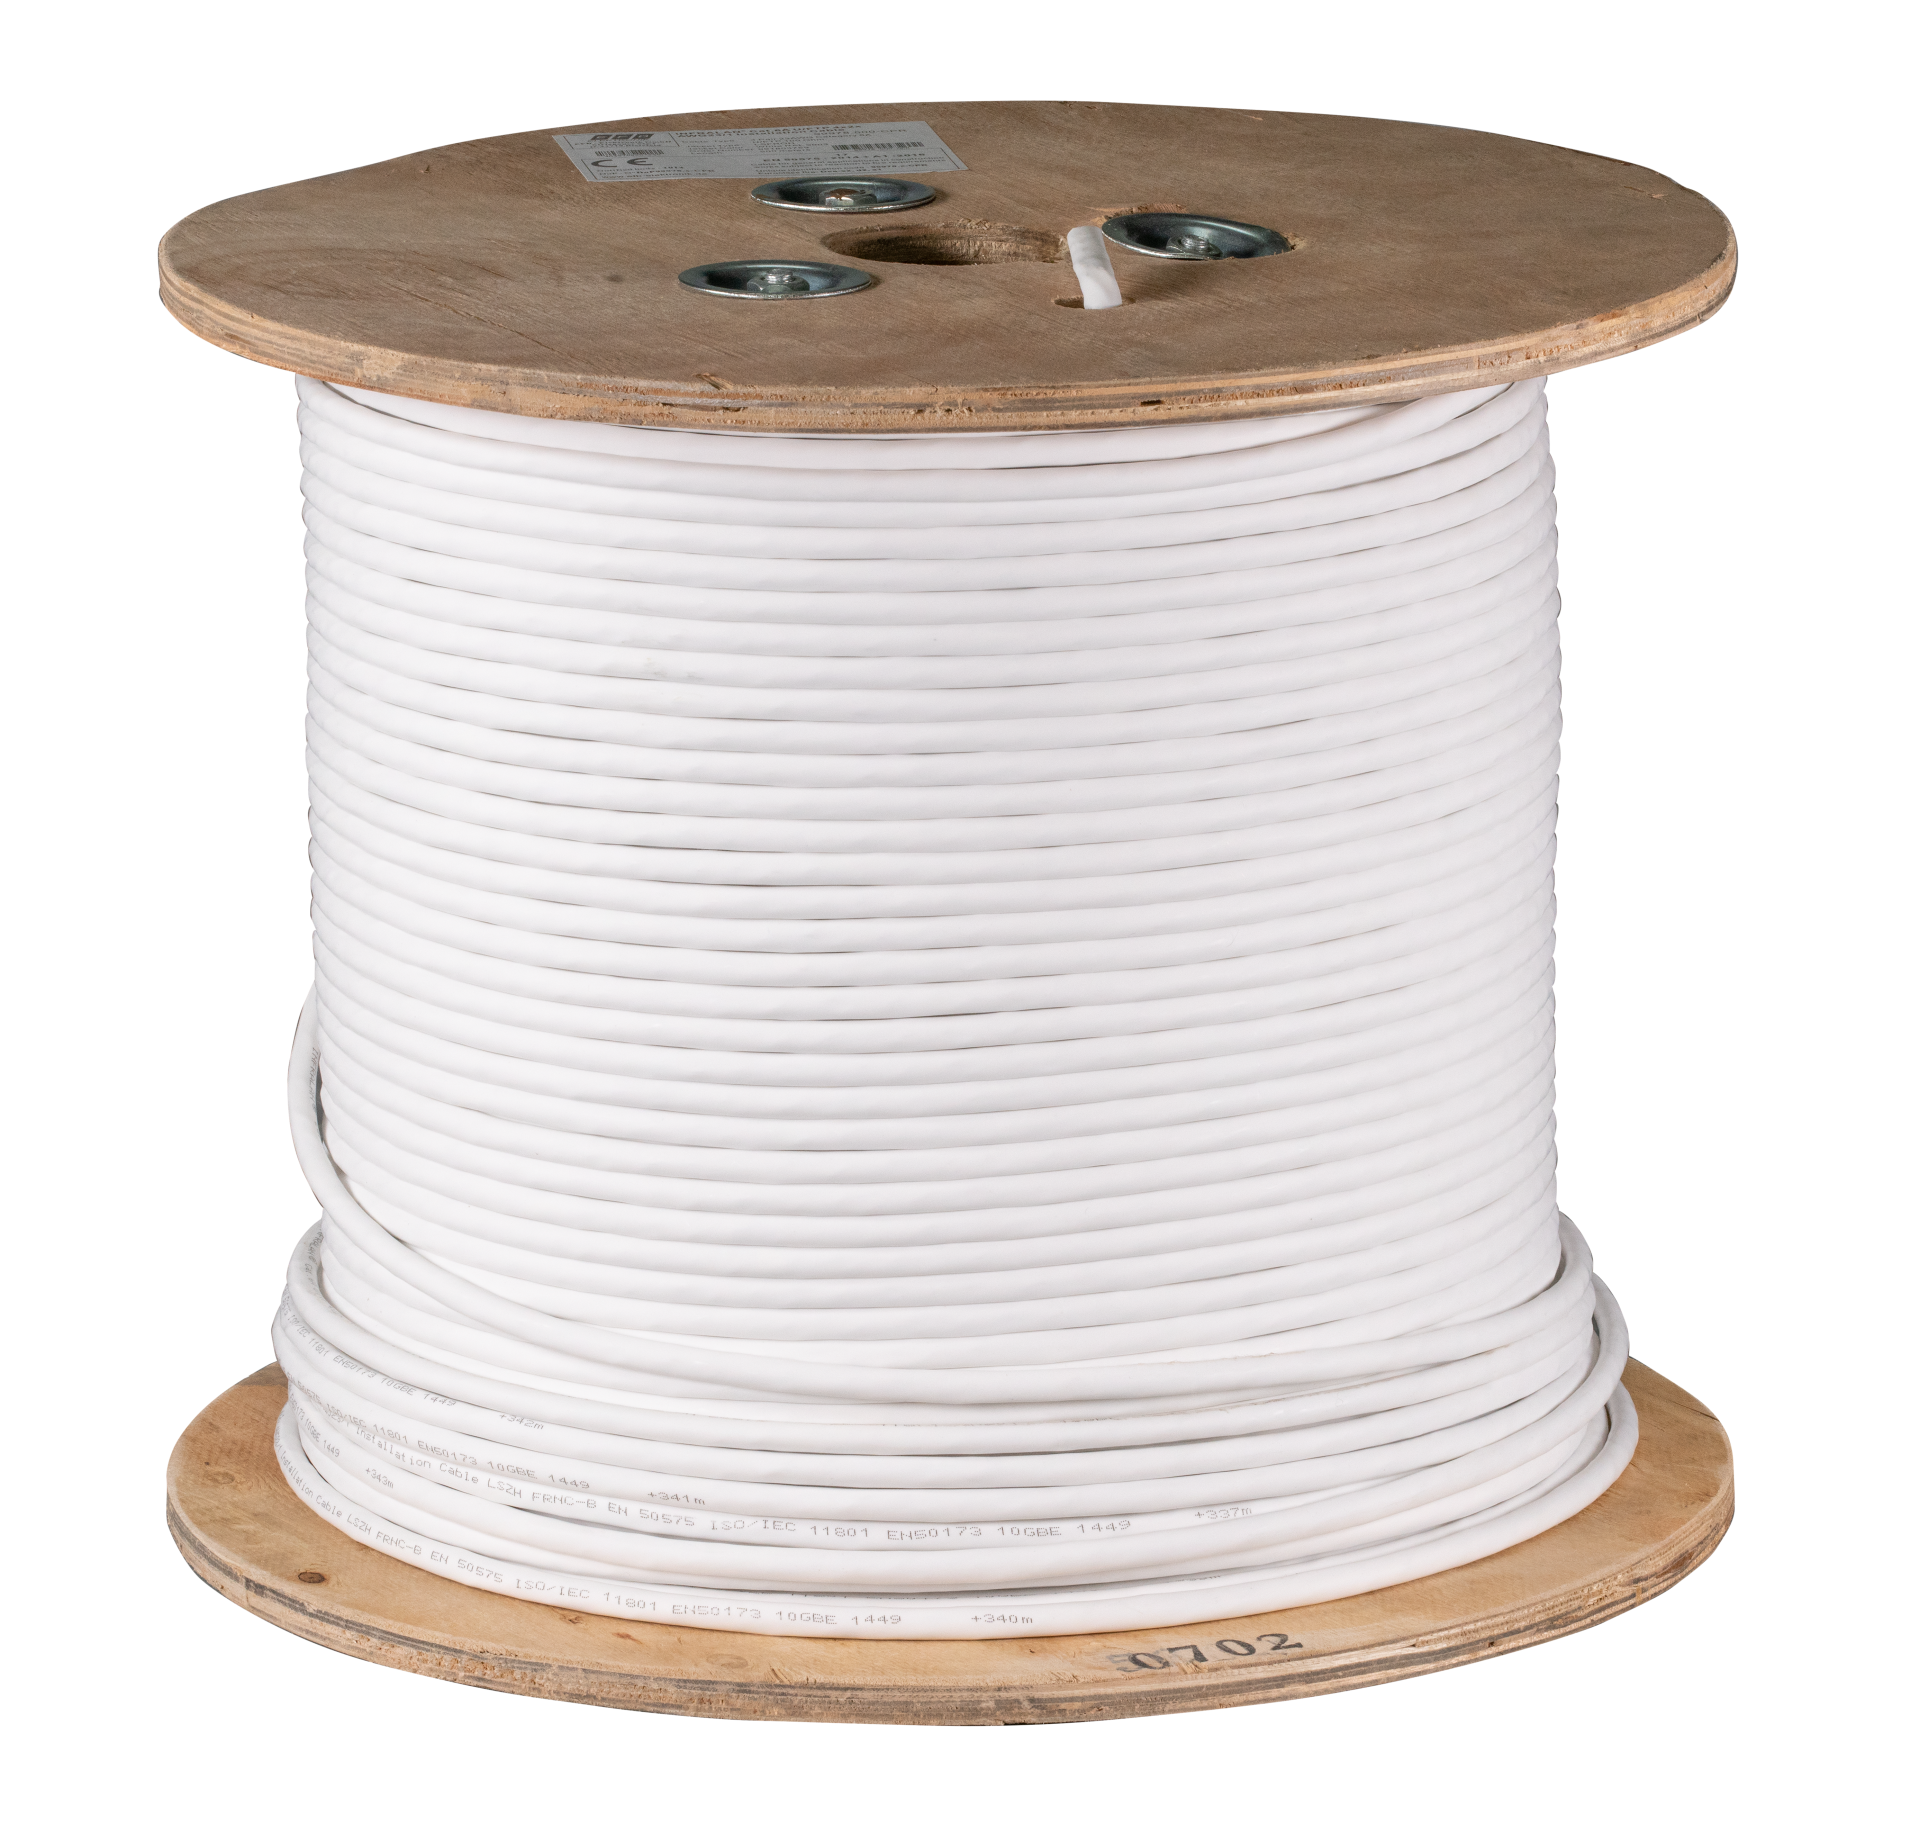 INFRALAN® U/FTP Cat.6A 500MHz, AWG23 4P Dca, 500m Drum, white